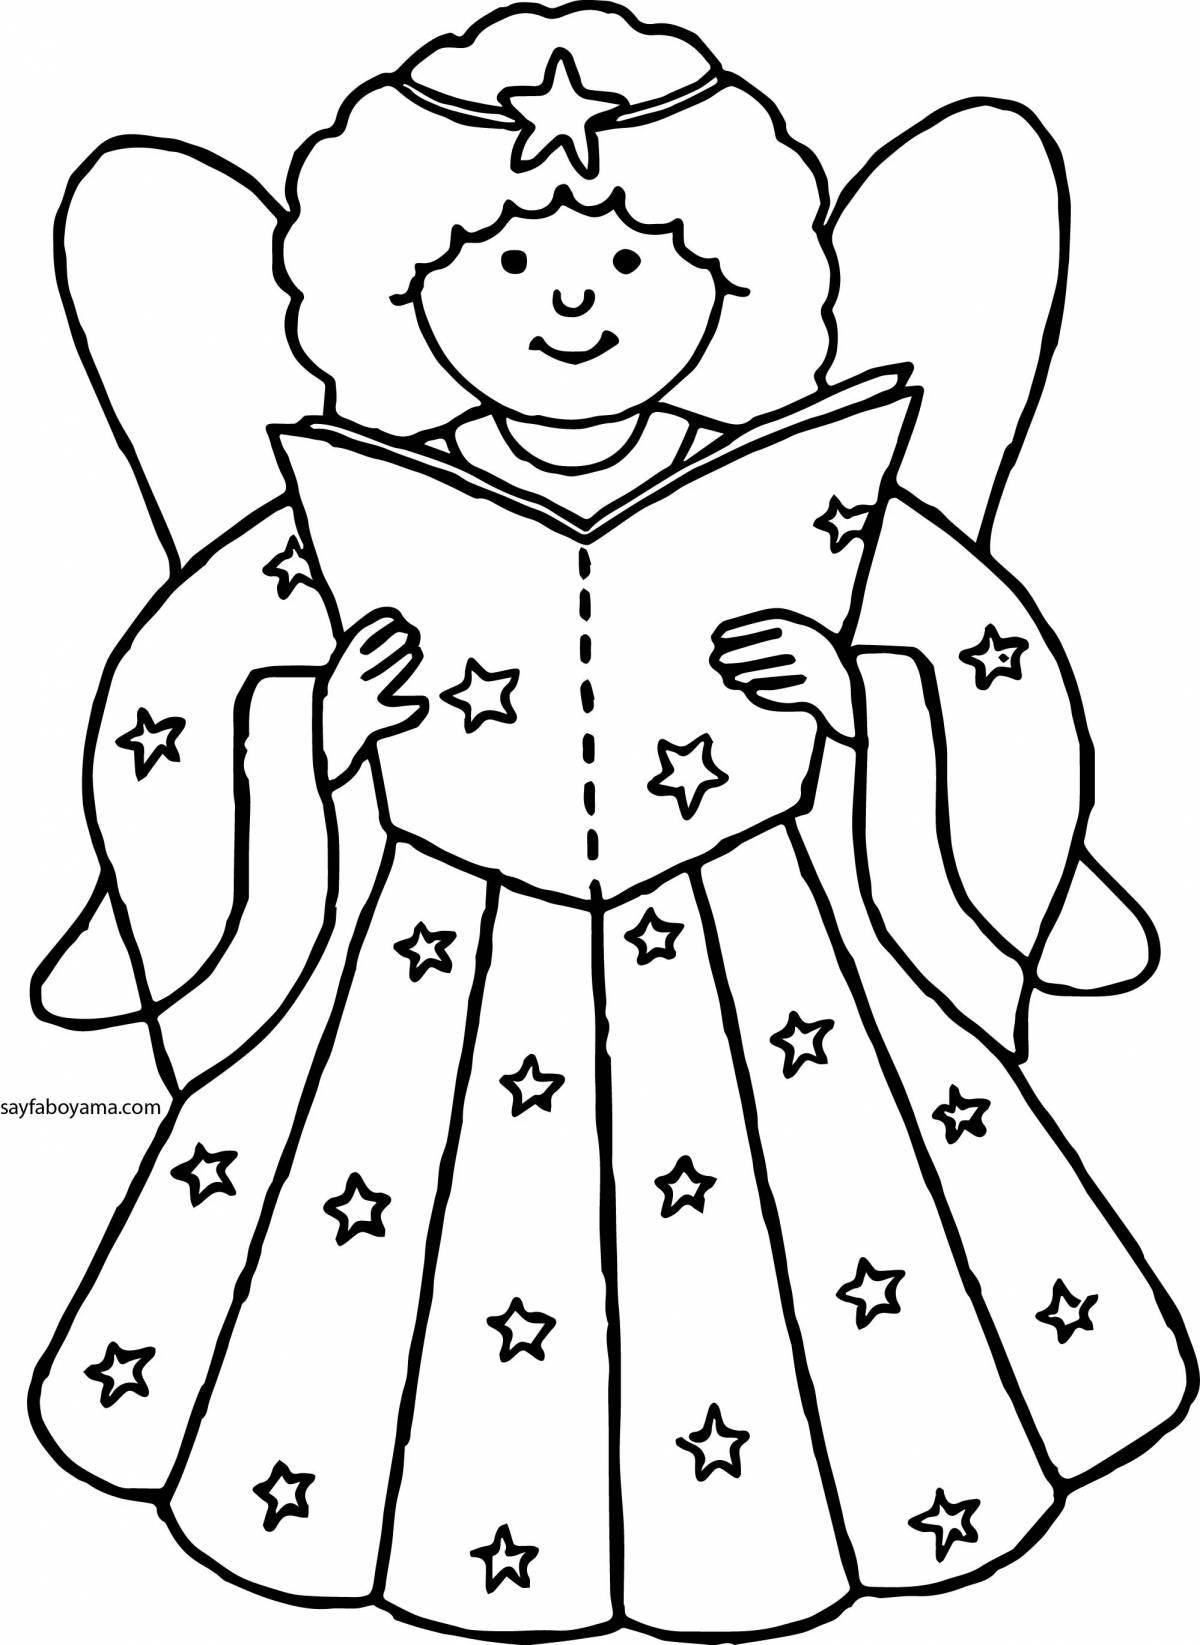 Amazing coloring pages of Christmas angels